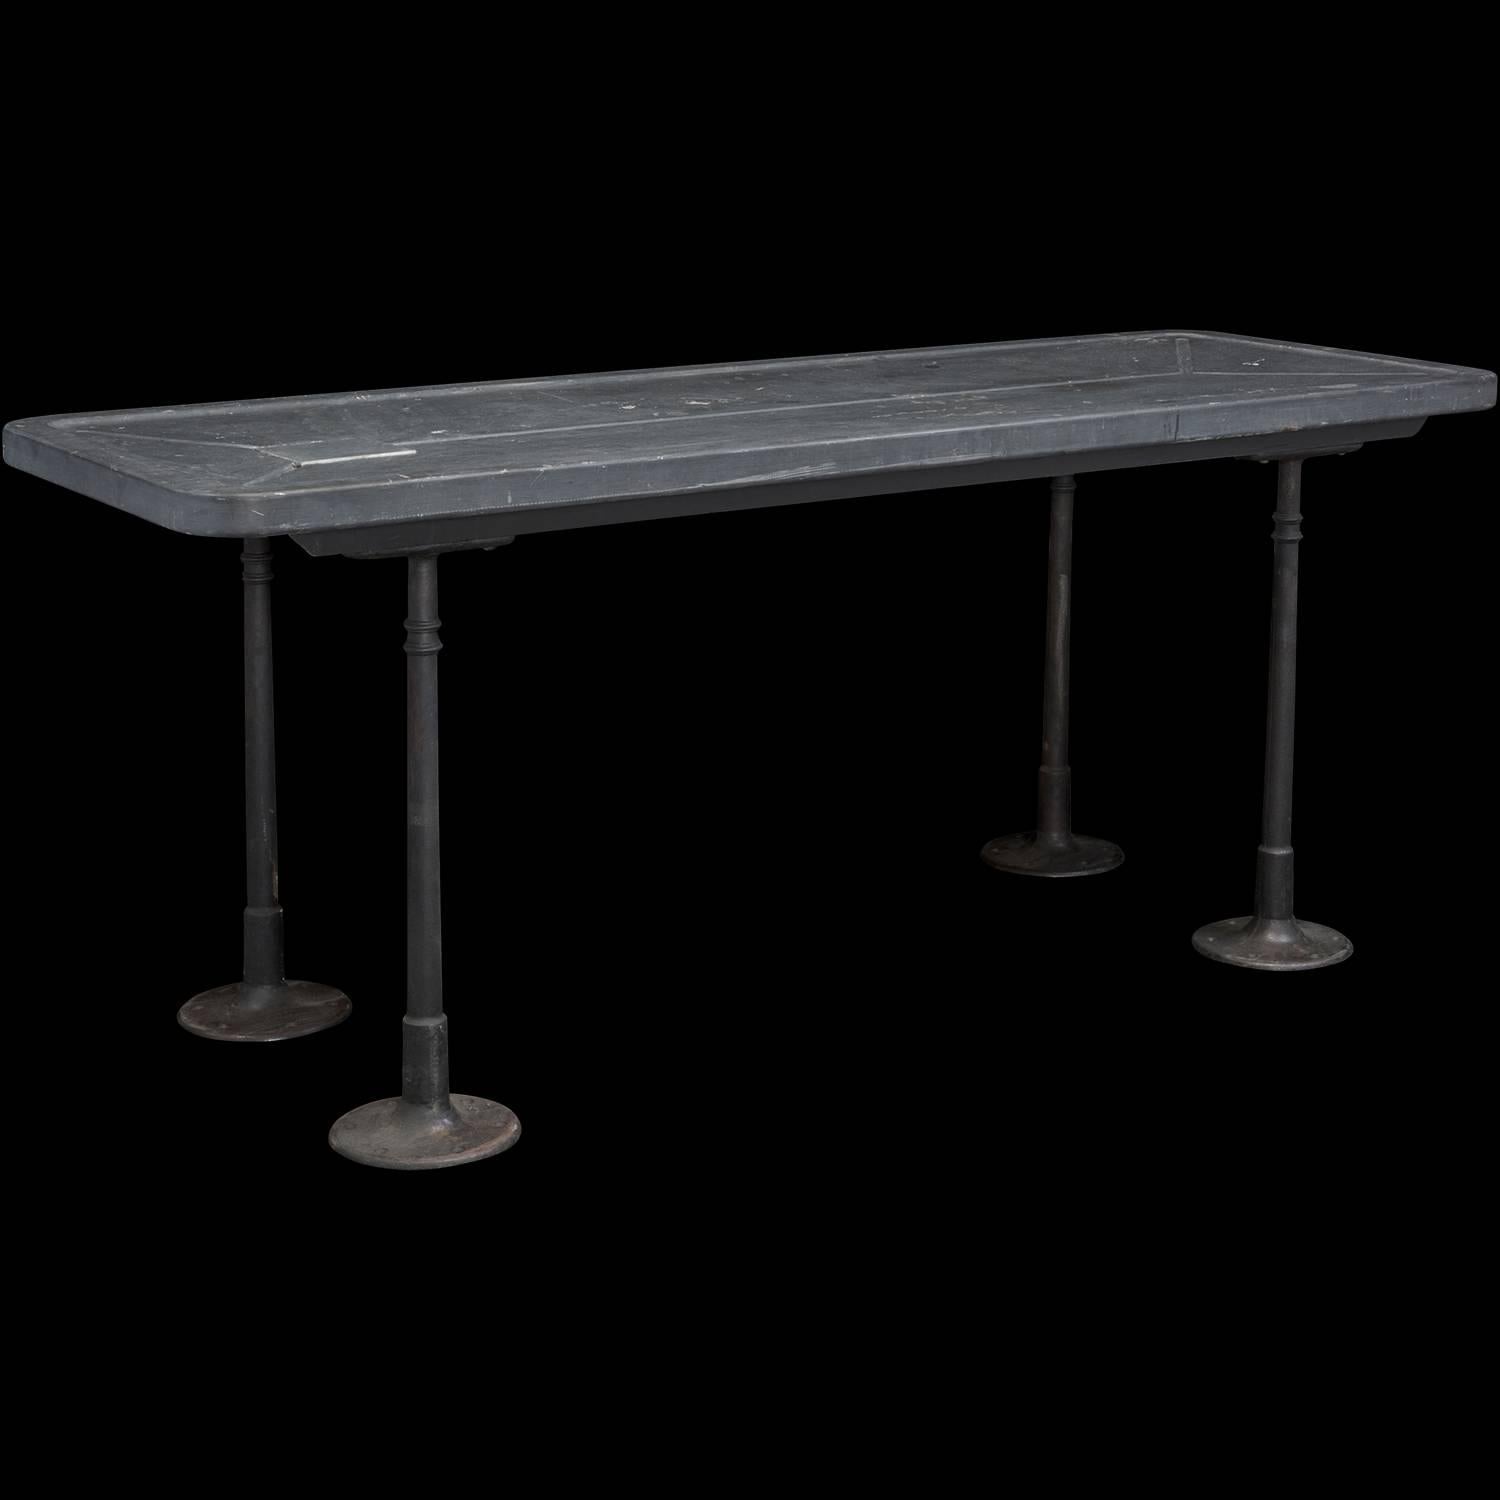 Industrial Slate Top Table, circa 1920

Cast iron legs with slate top on wood supports.